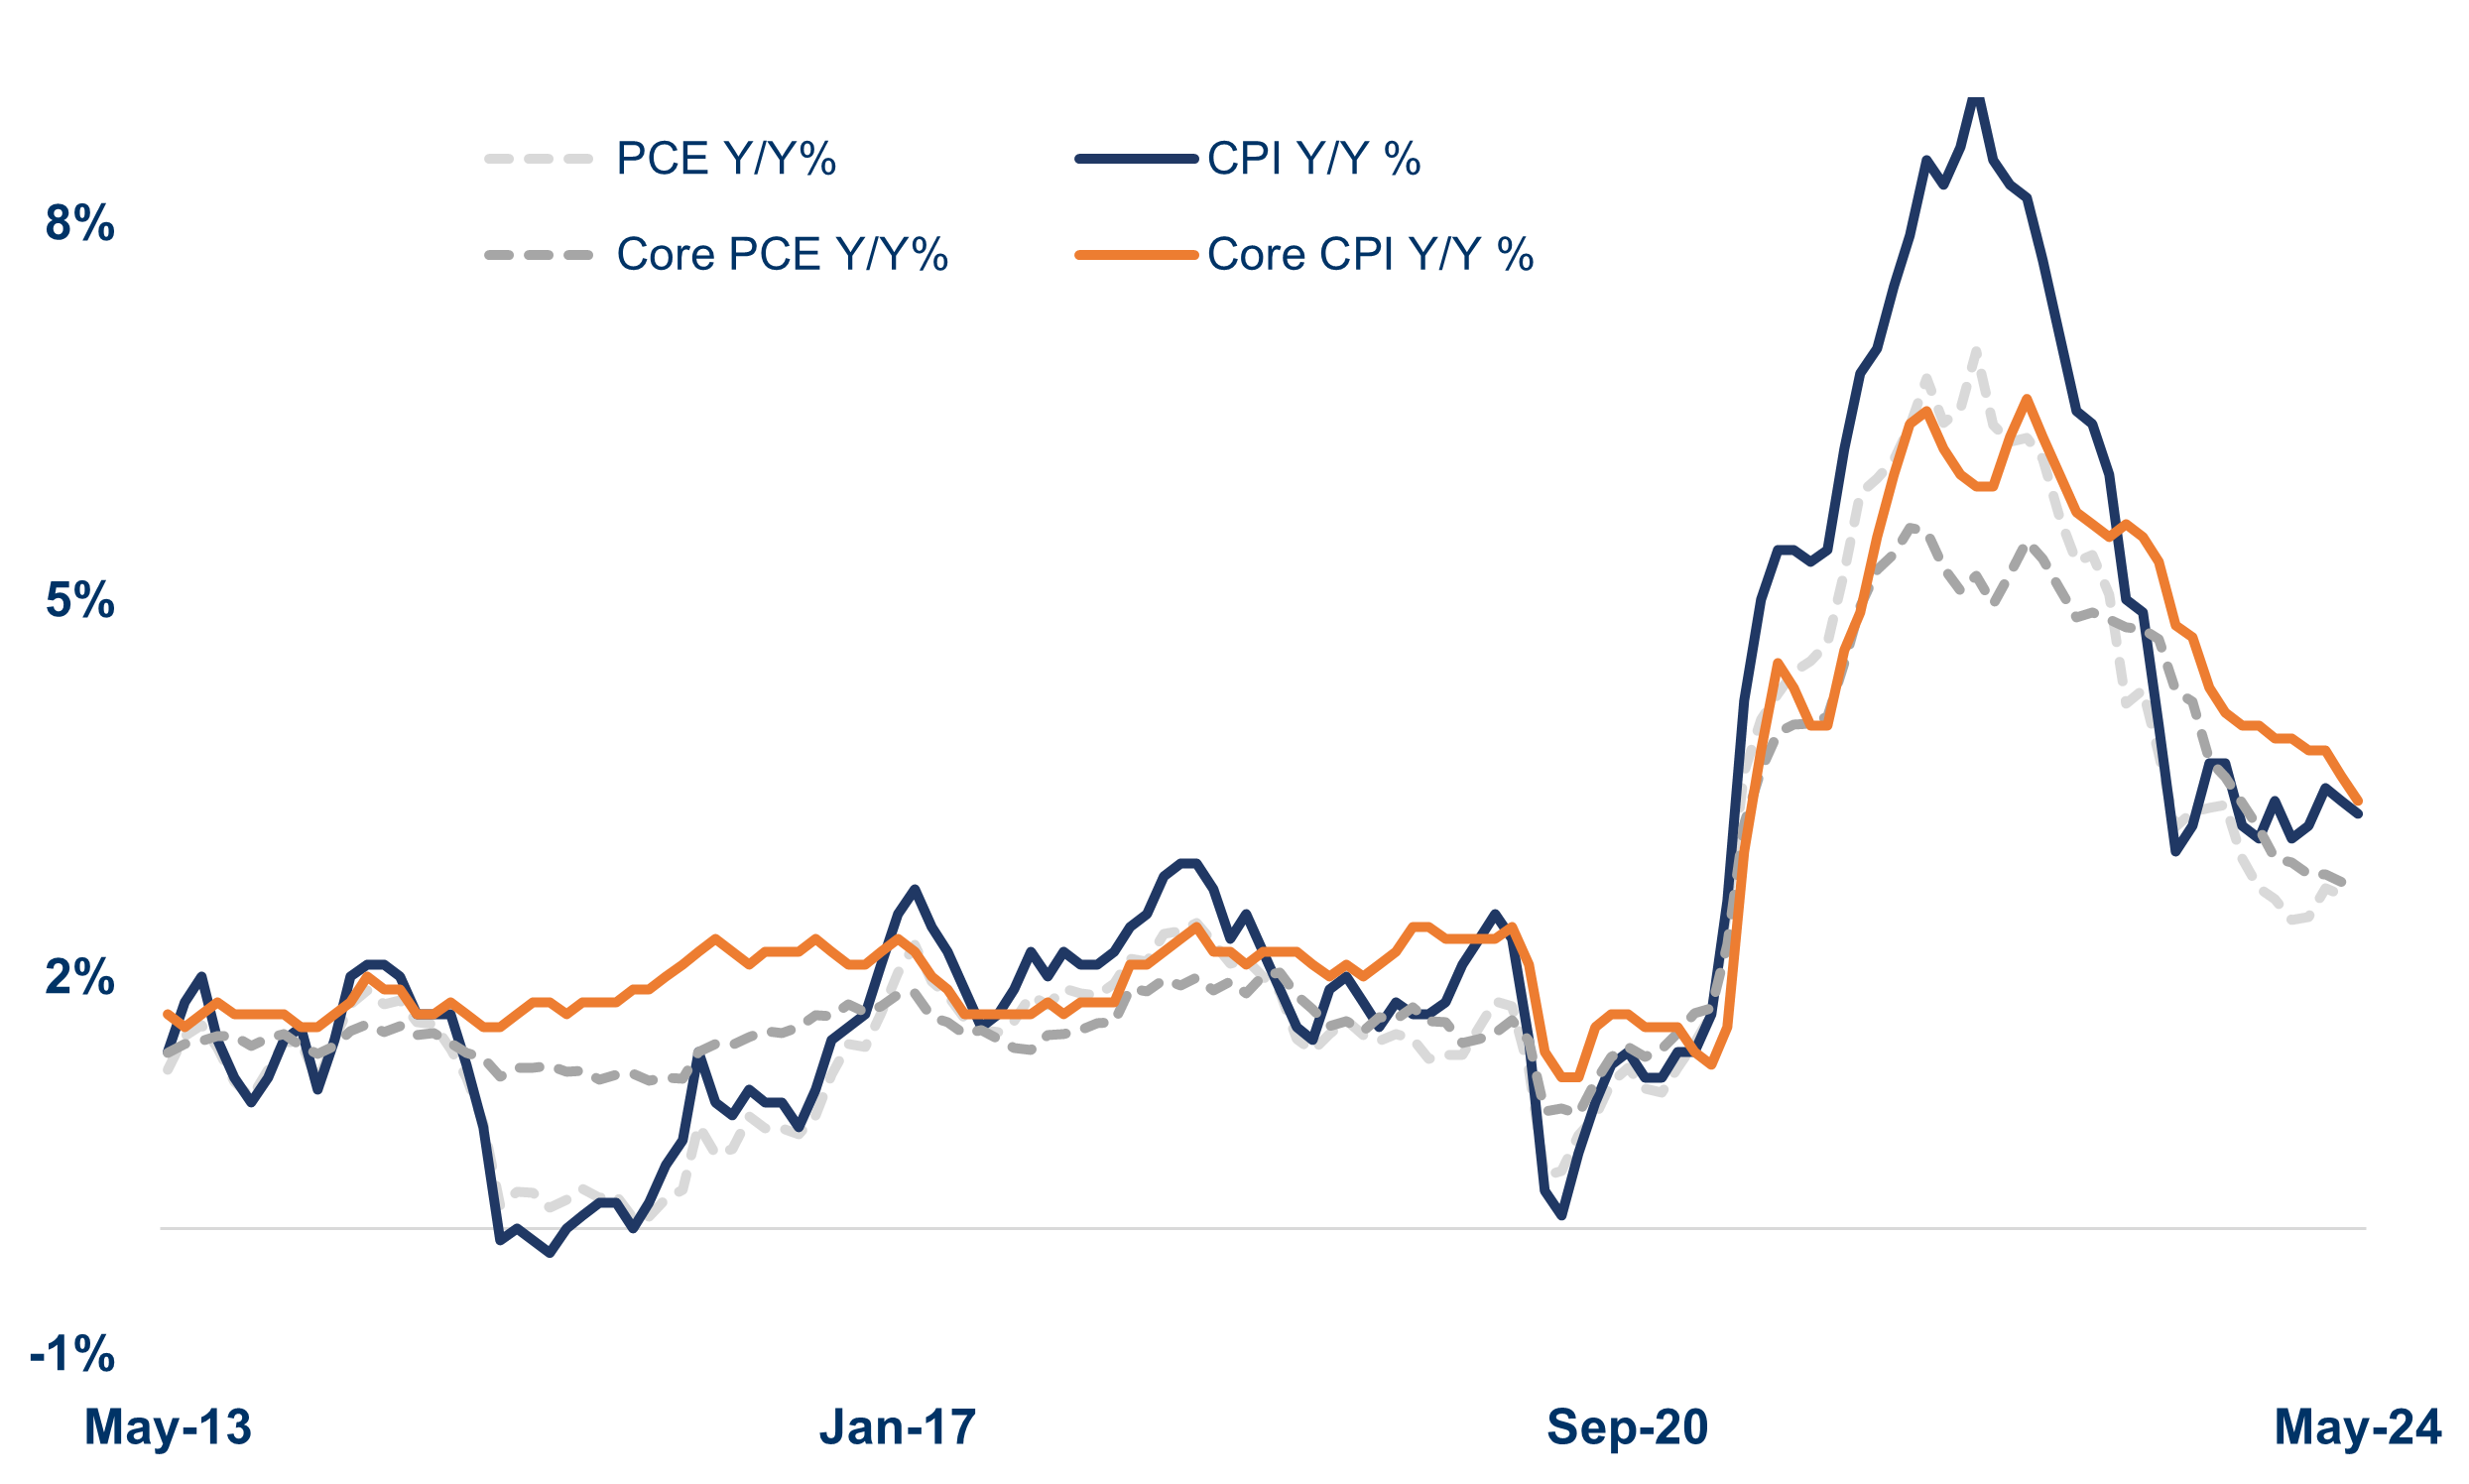 The chart also shows that the PCE price index and Core PCE price index are both above the target inflation rate of 2%.